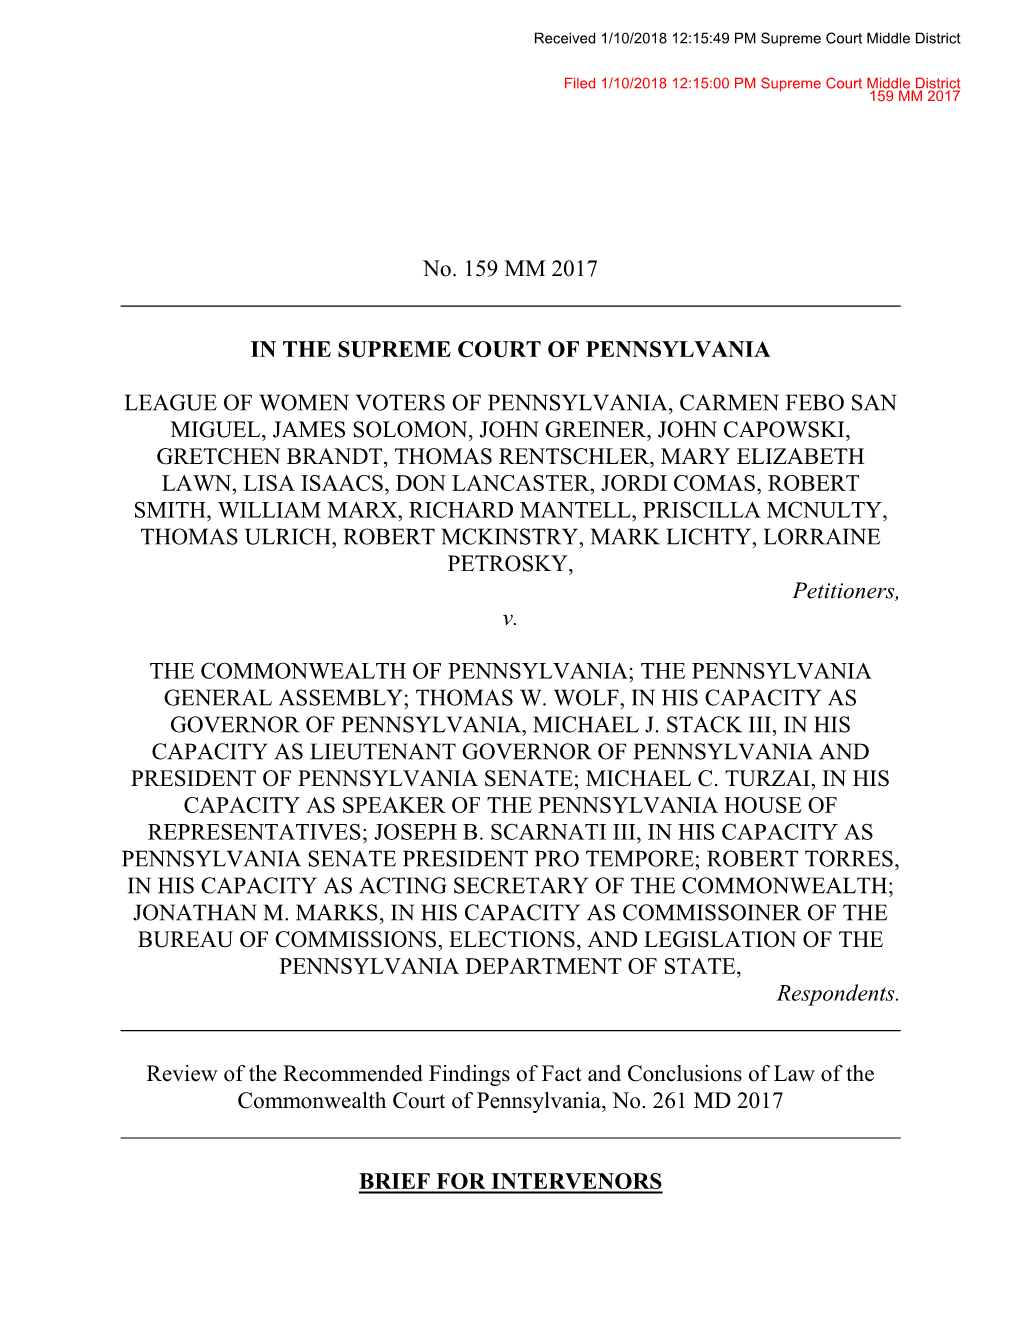 No. 159 MM 2017 in the SUPREME COURT of PENNSYLVANIA